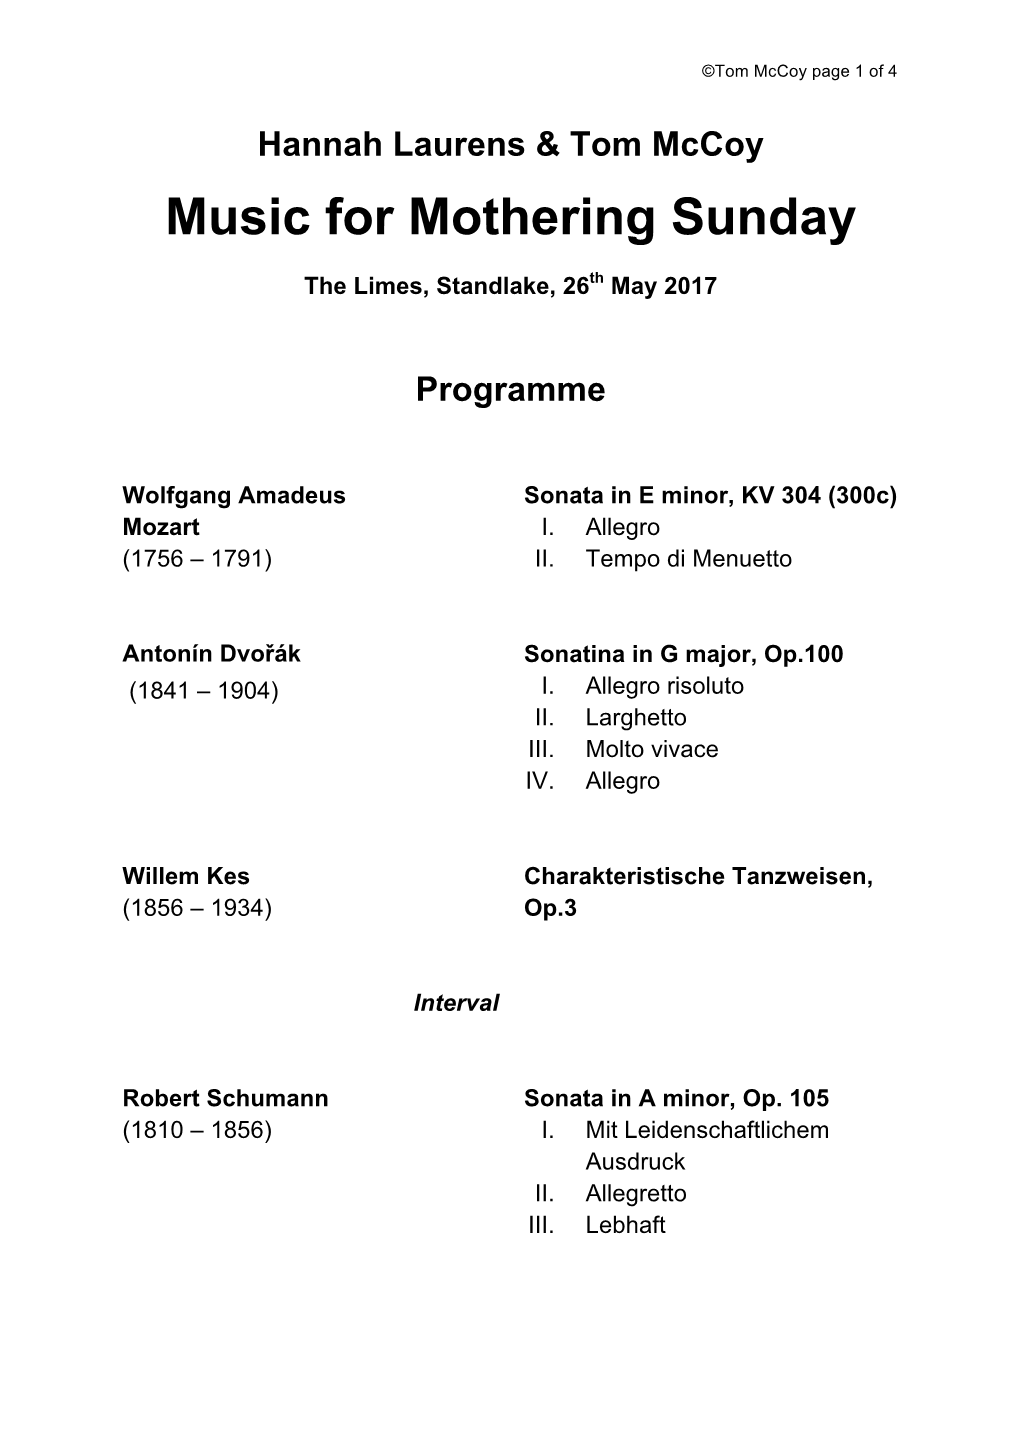 Music for Mothering Sunday